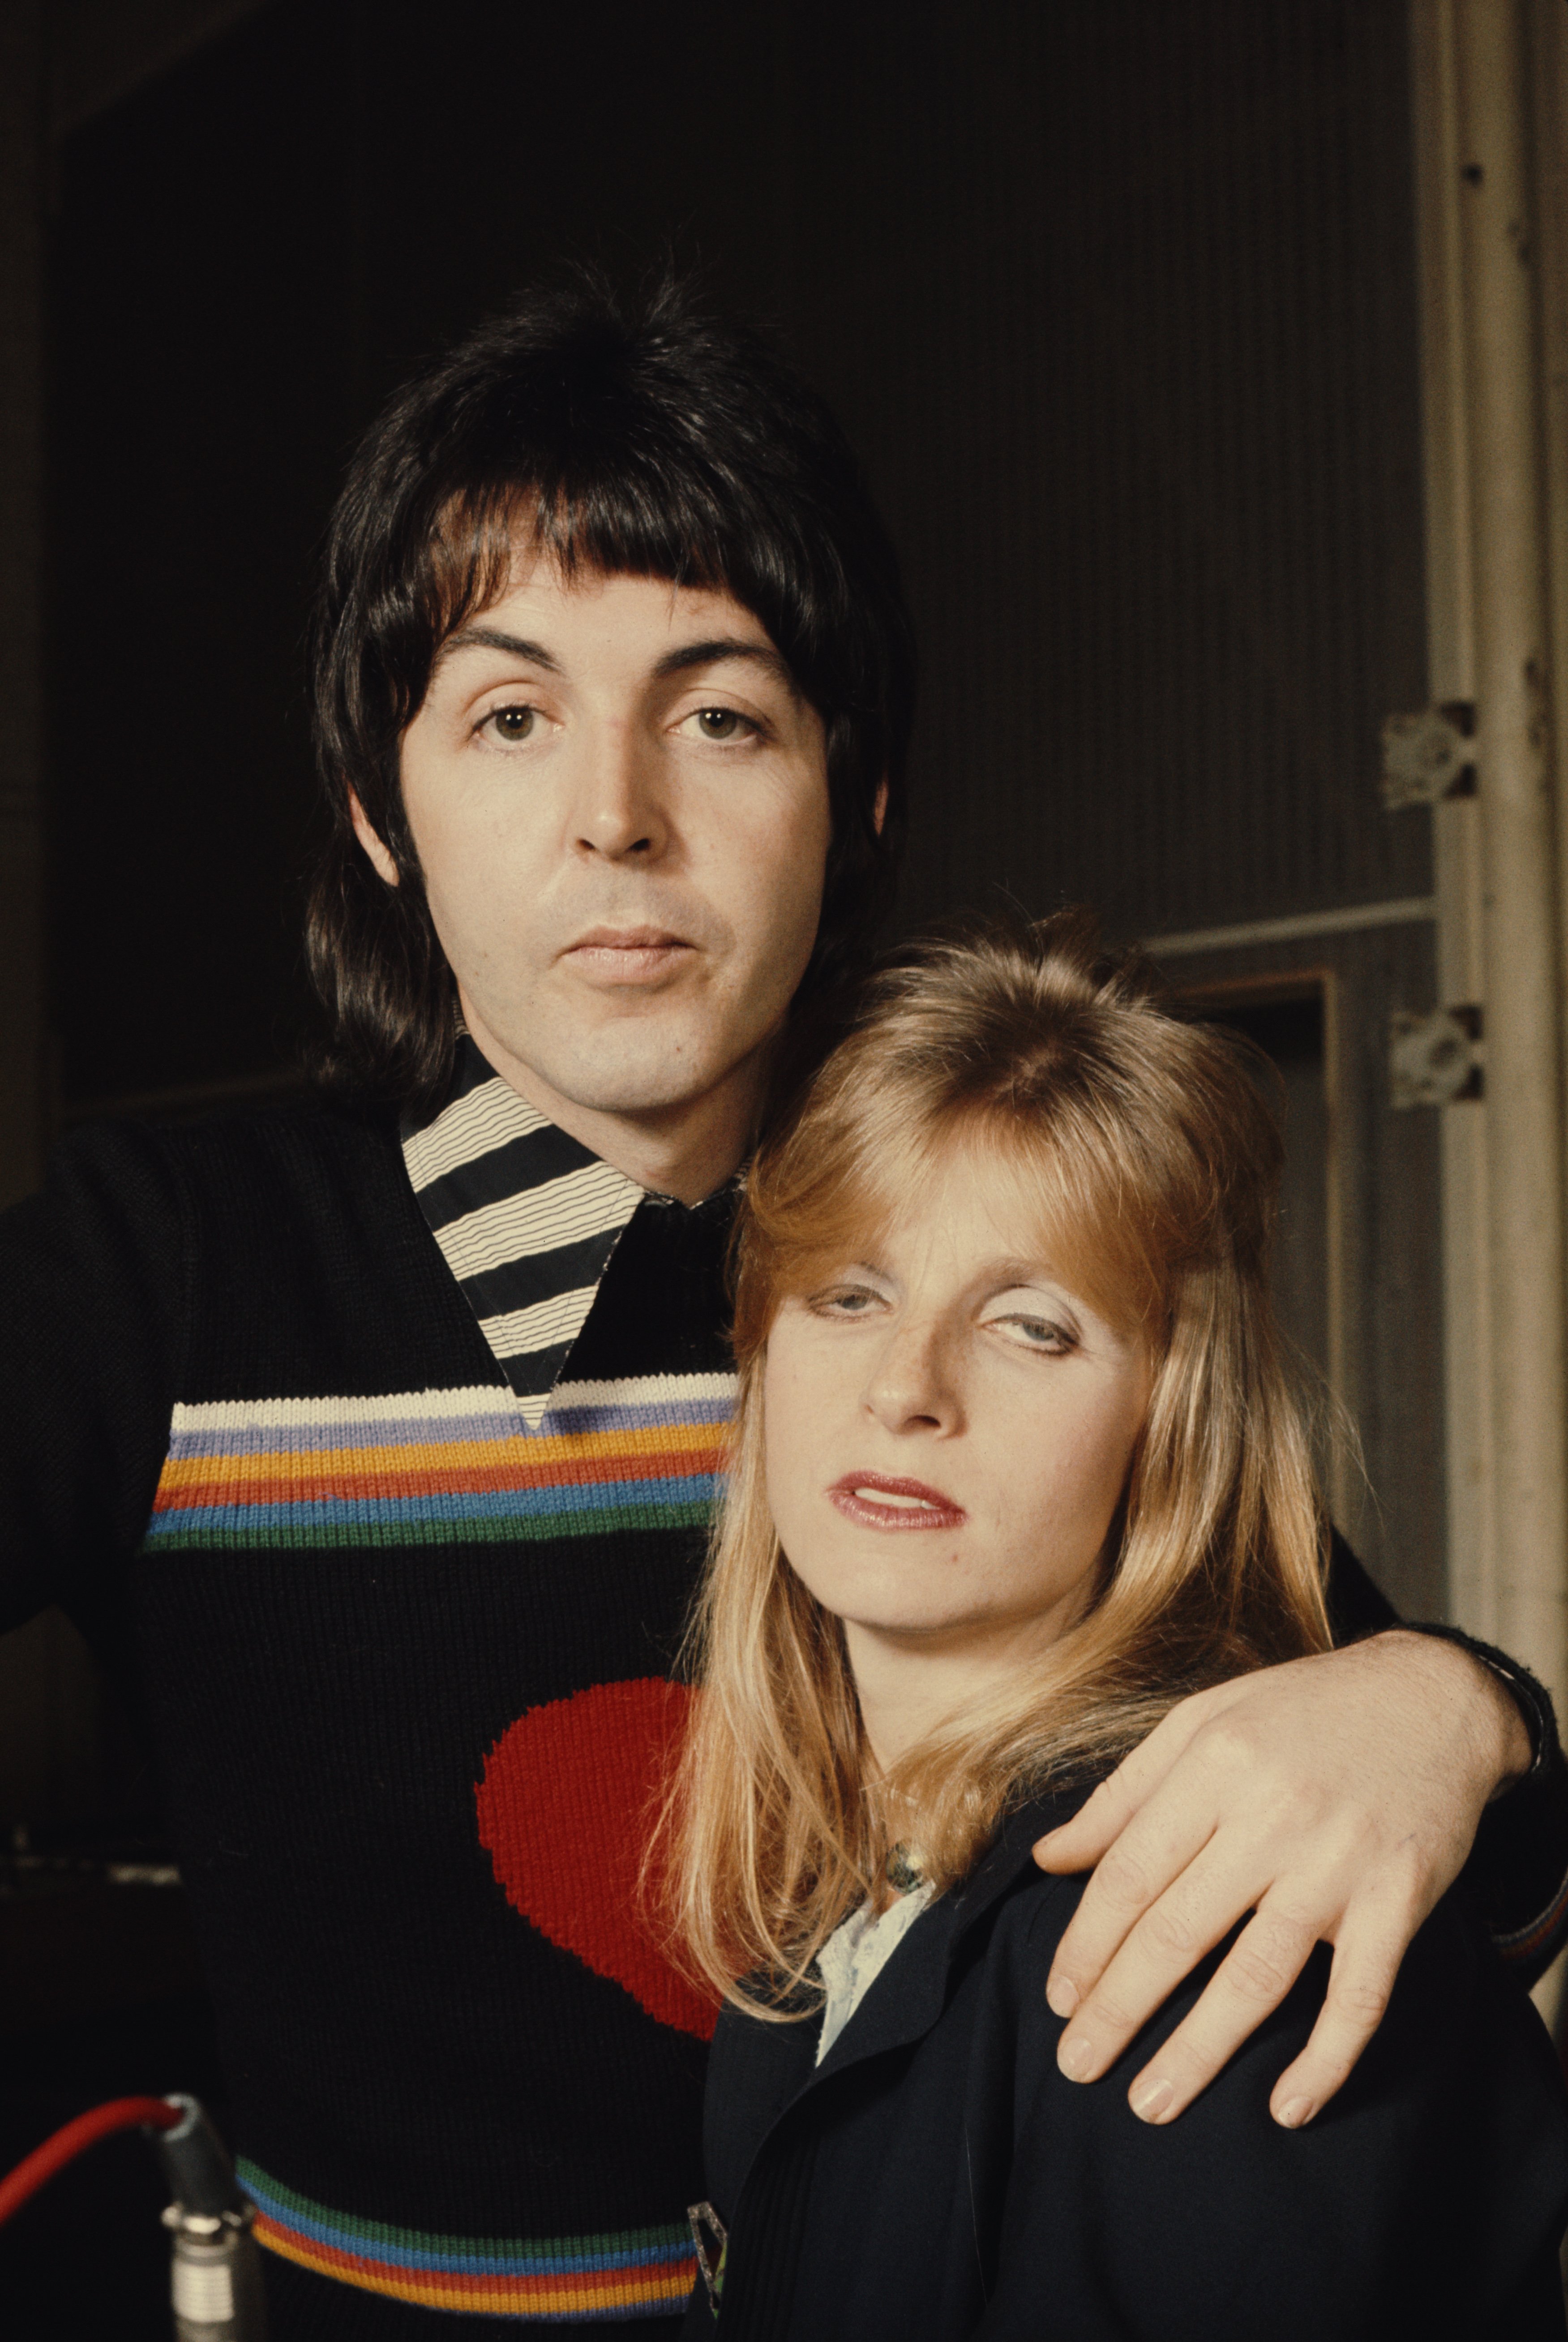 Paul and Linda McCartney, of British rock group Wings, at Abbey Road Studios, to record the album in London on November 15, 1974 | Source: Getty Images